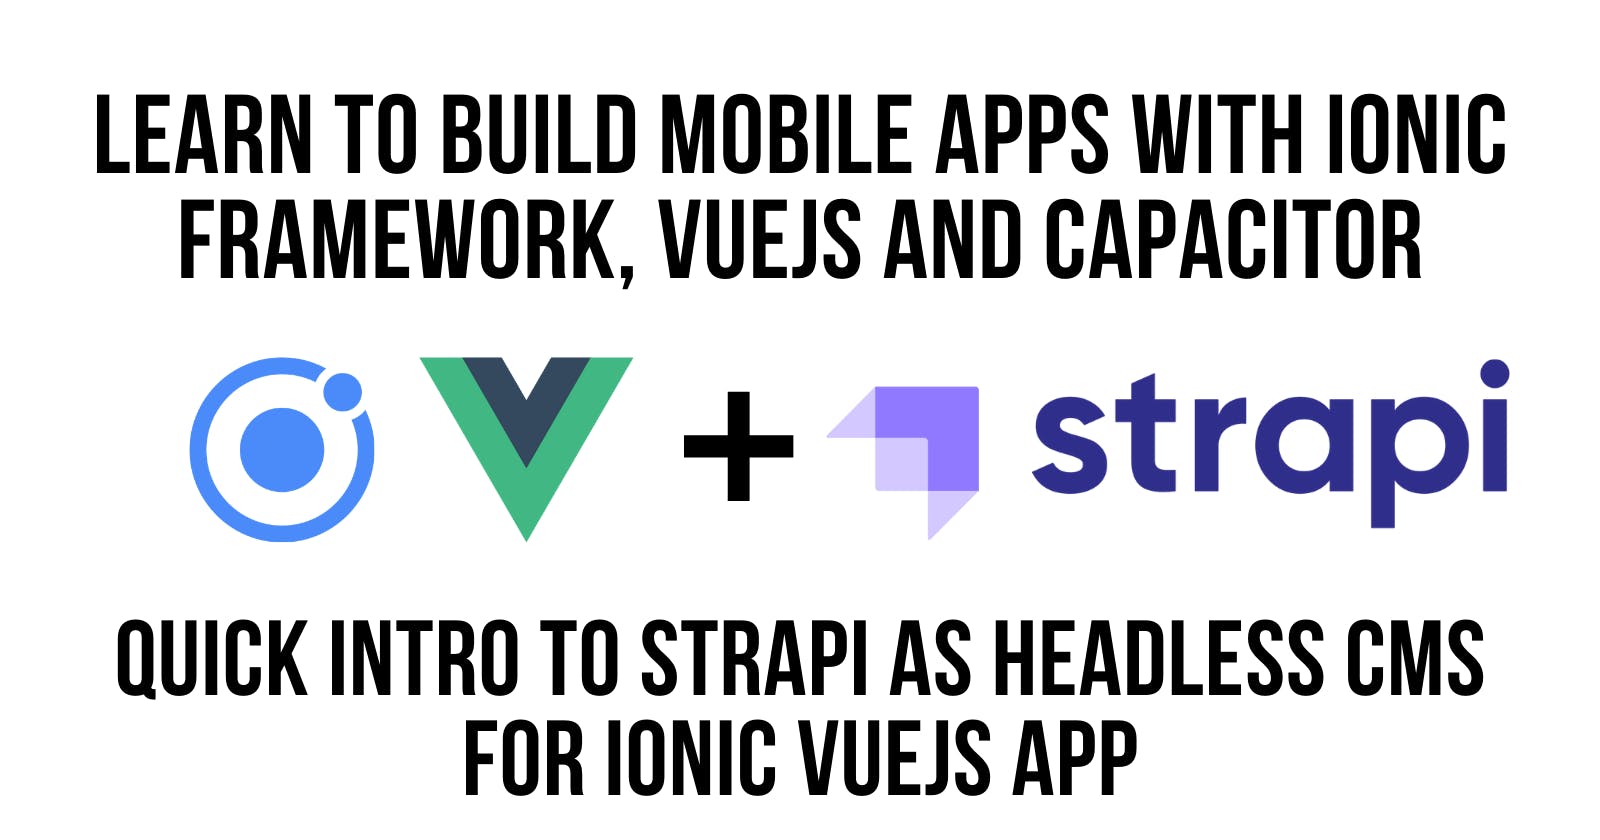 [VIDEO] Quick Introduction to Strapi Headless CMS for Ionic Vue JS Mobile App